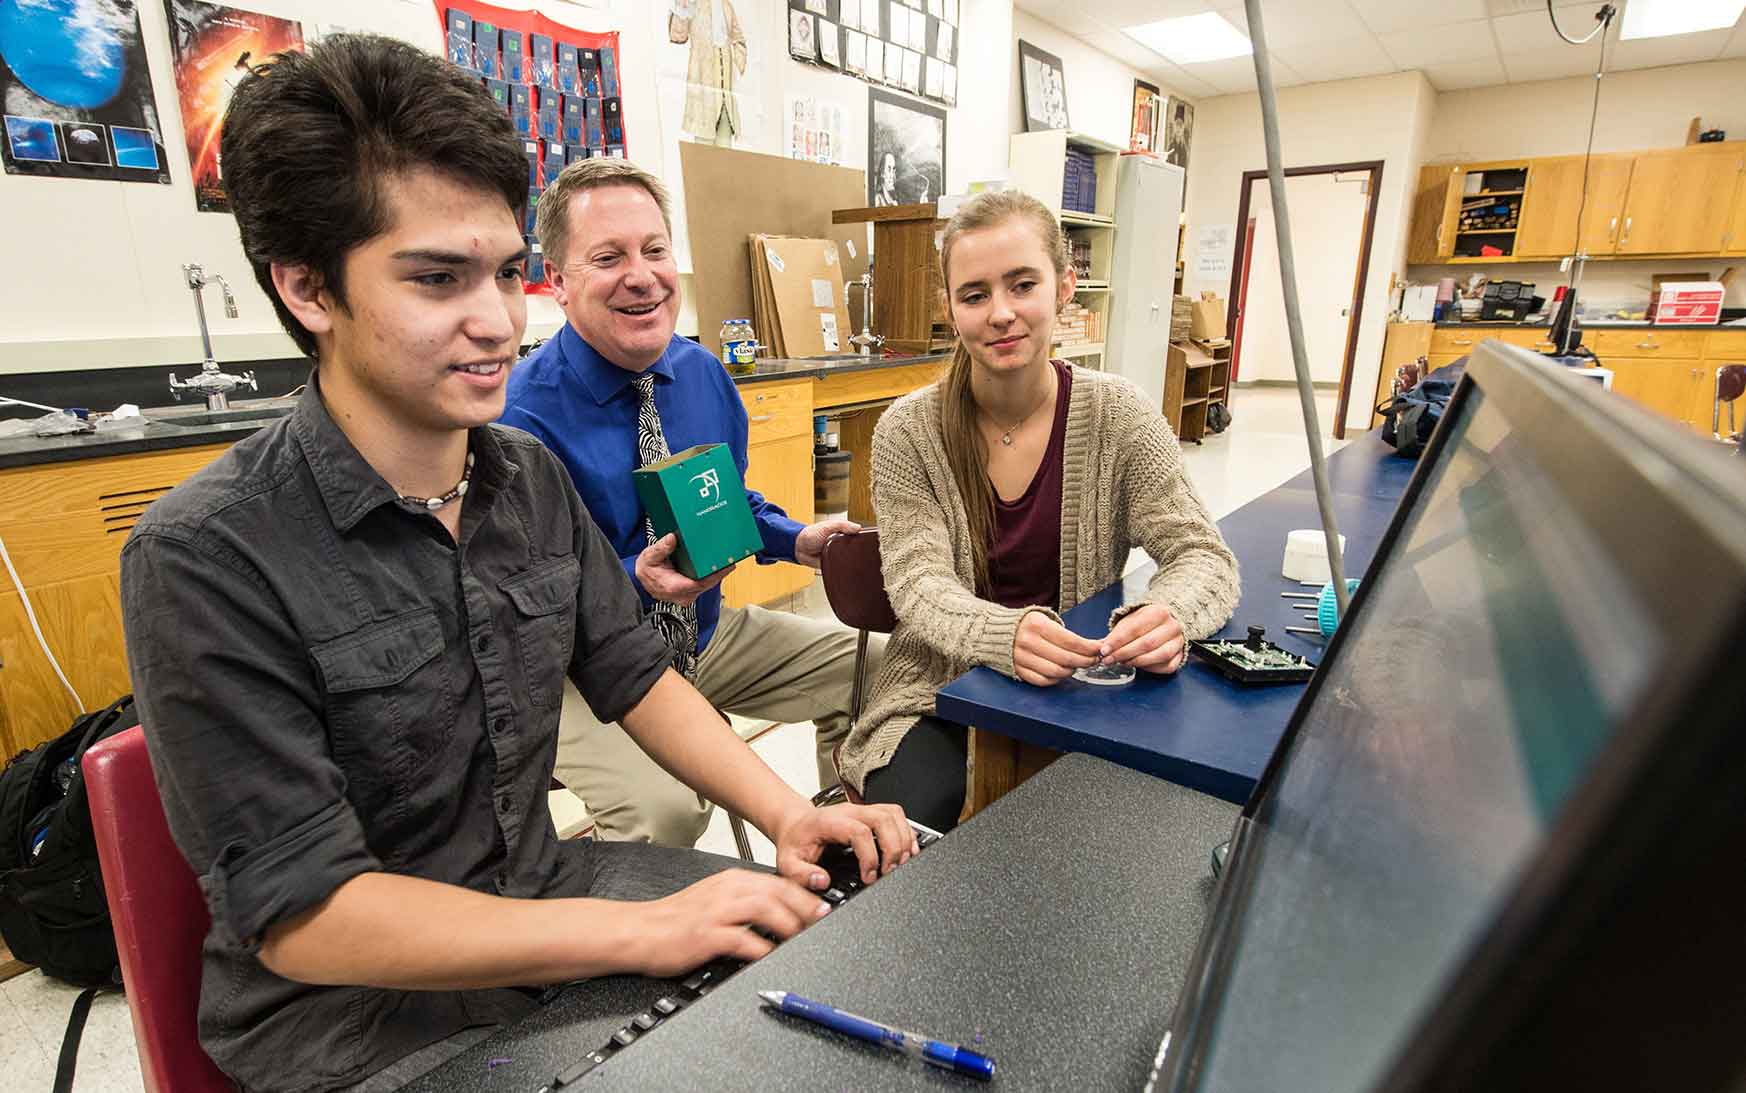 Photo shows a male student working on a computer while a teacher and another student watch.